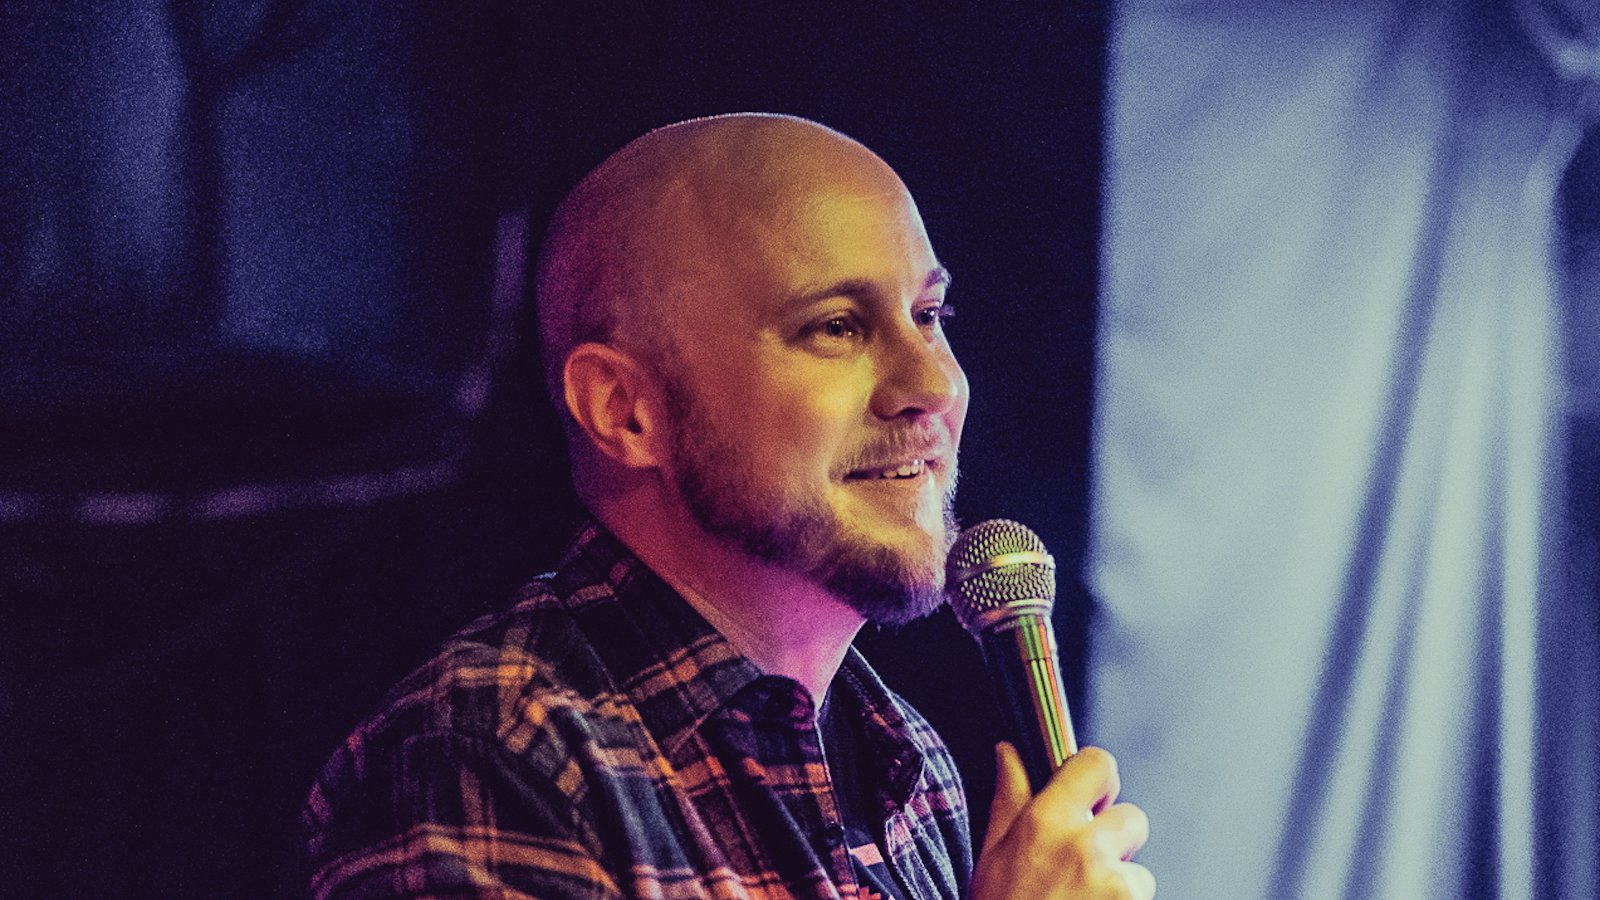 A bald man with a beard smiles and wearing a plaid shirt talks into a microphone